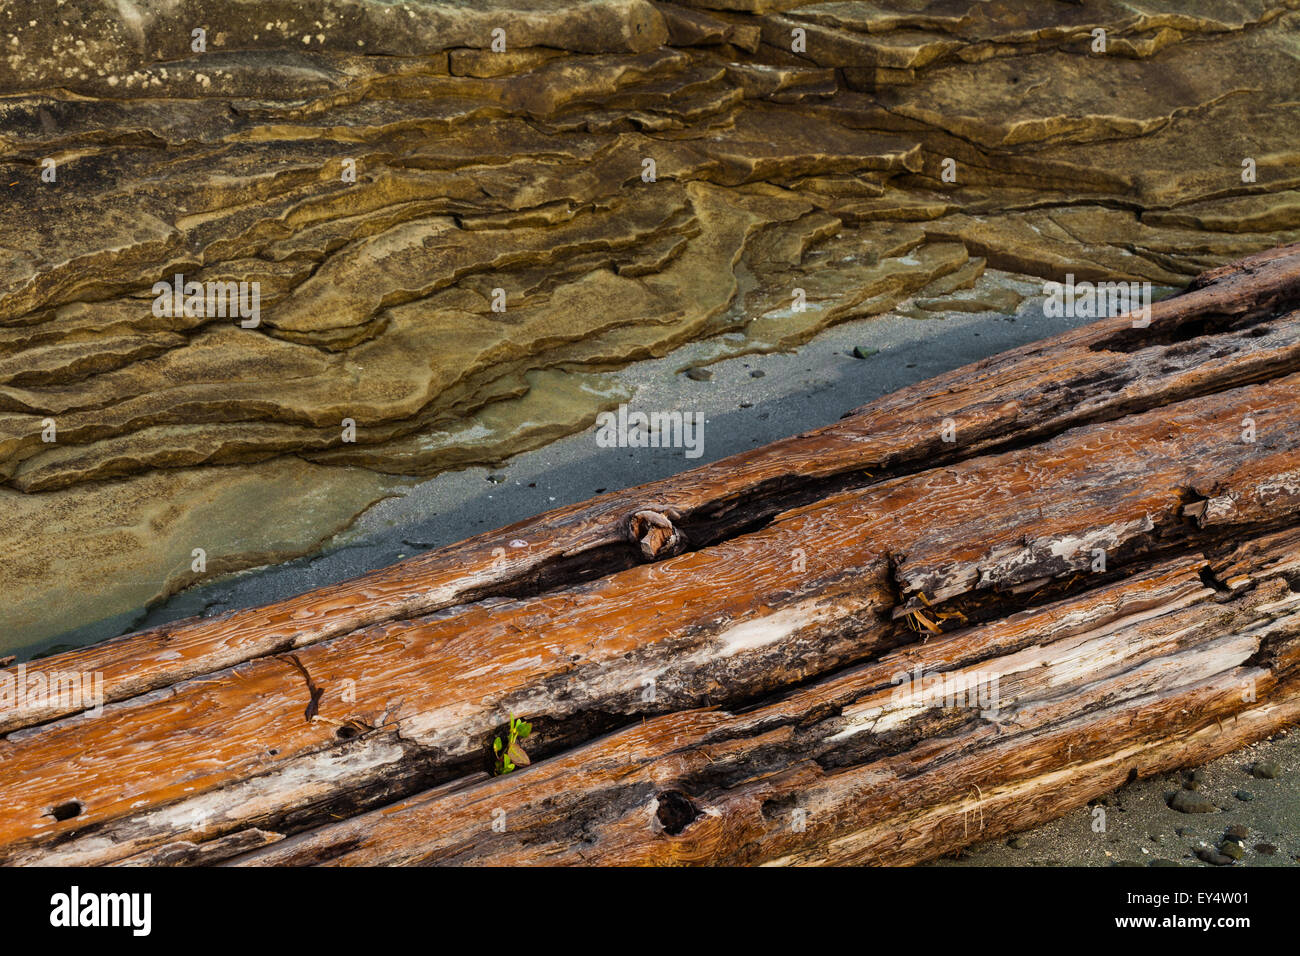 Abstract image of driftwood washed against a sedimentary rock shelf on a beach of Protection Island, British Columbia, Canada Stock Photo